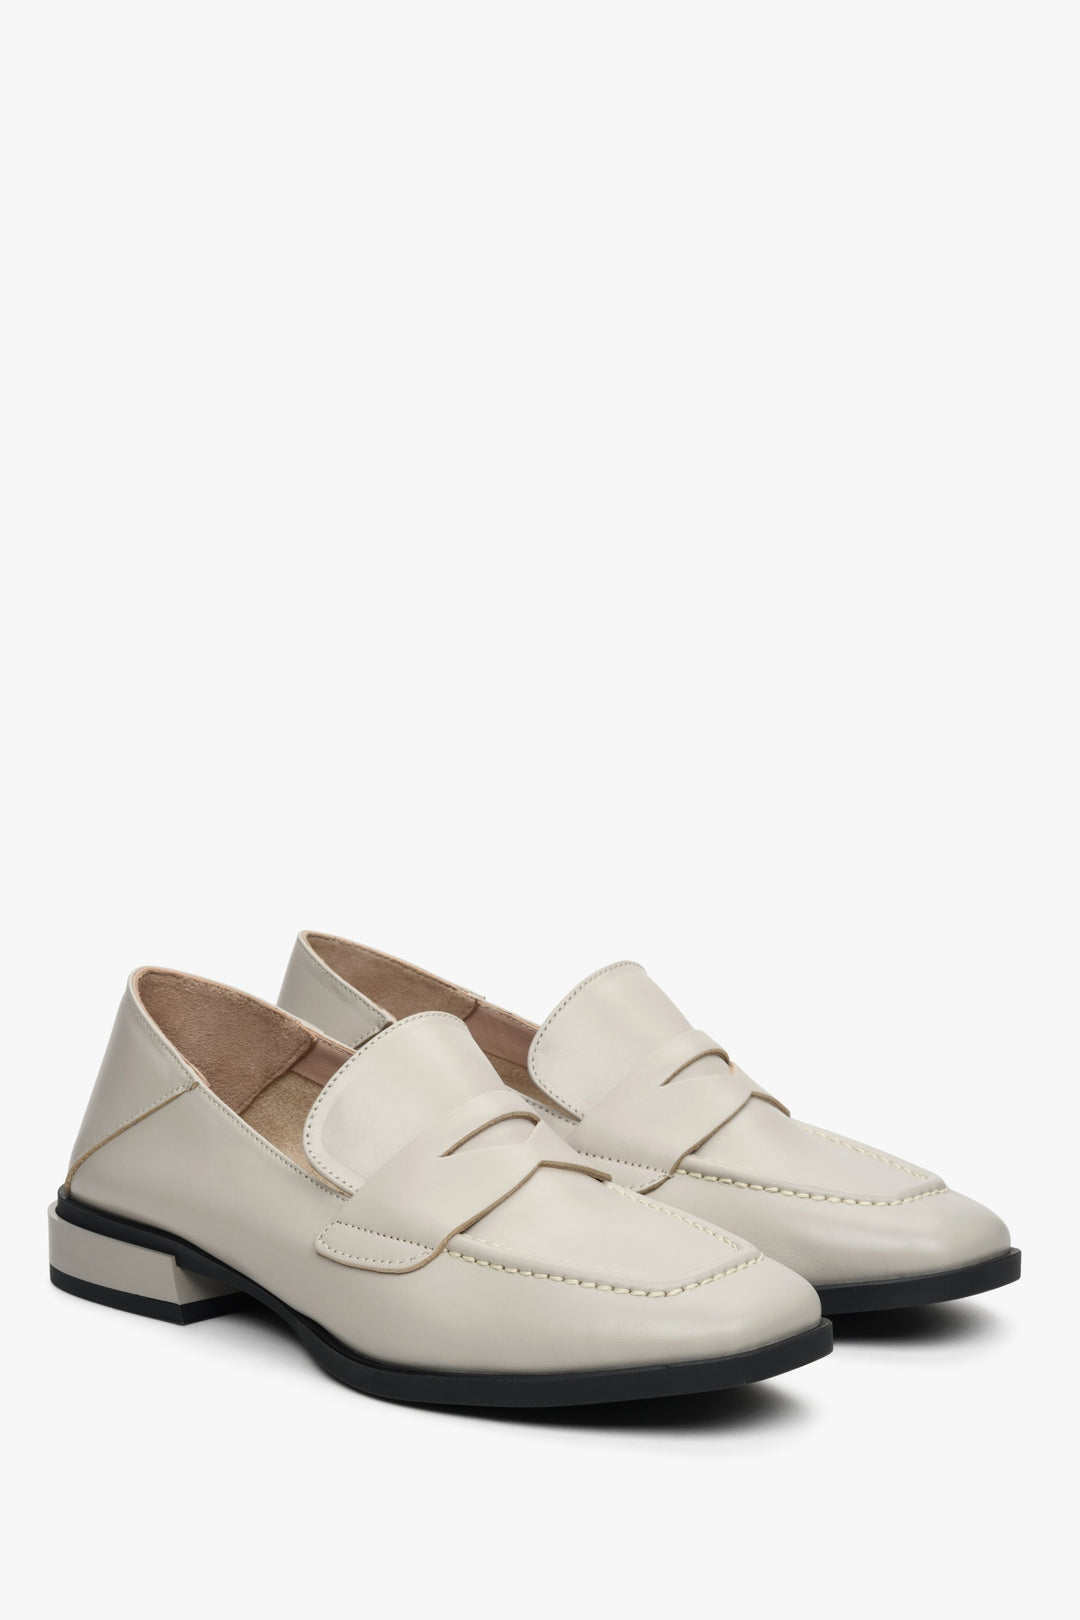 Women's beige leather loafers with a low heel by Estro - presentation of the toe of the shoes.